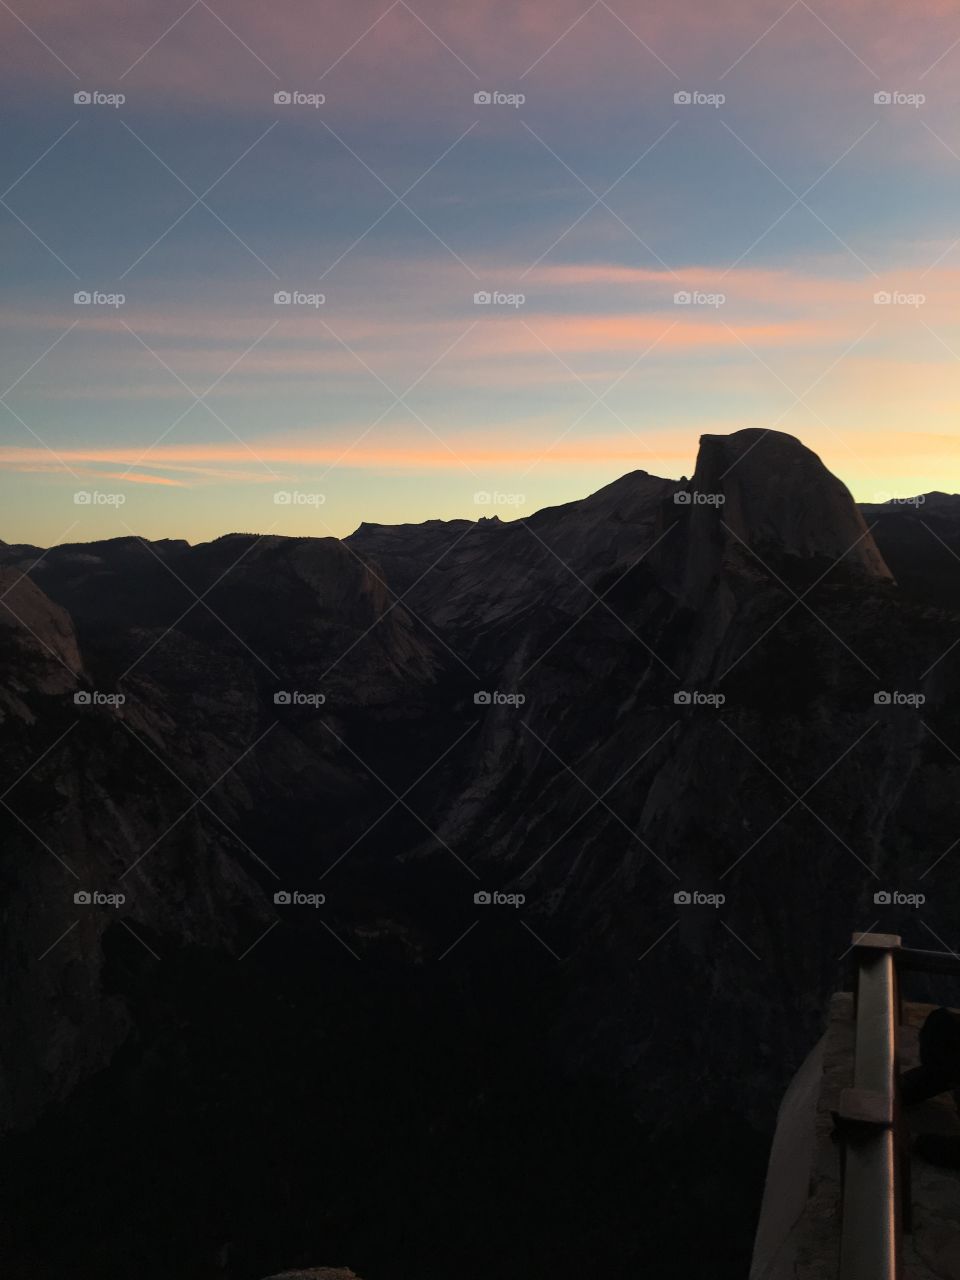 A view of Half Dome Mountain in Yosemite at dawn I. The fall on a clear day with slight wispy clouds allowing the sunrise to light up the sky with tones of orange and pink contrasting the deep and light blues of sky as the sun rises. 